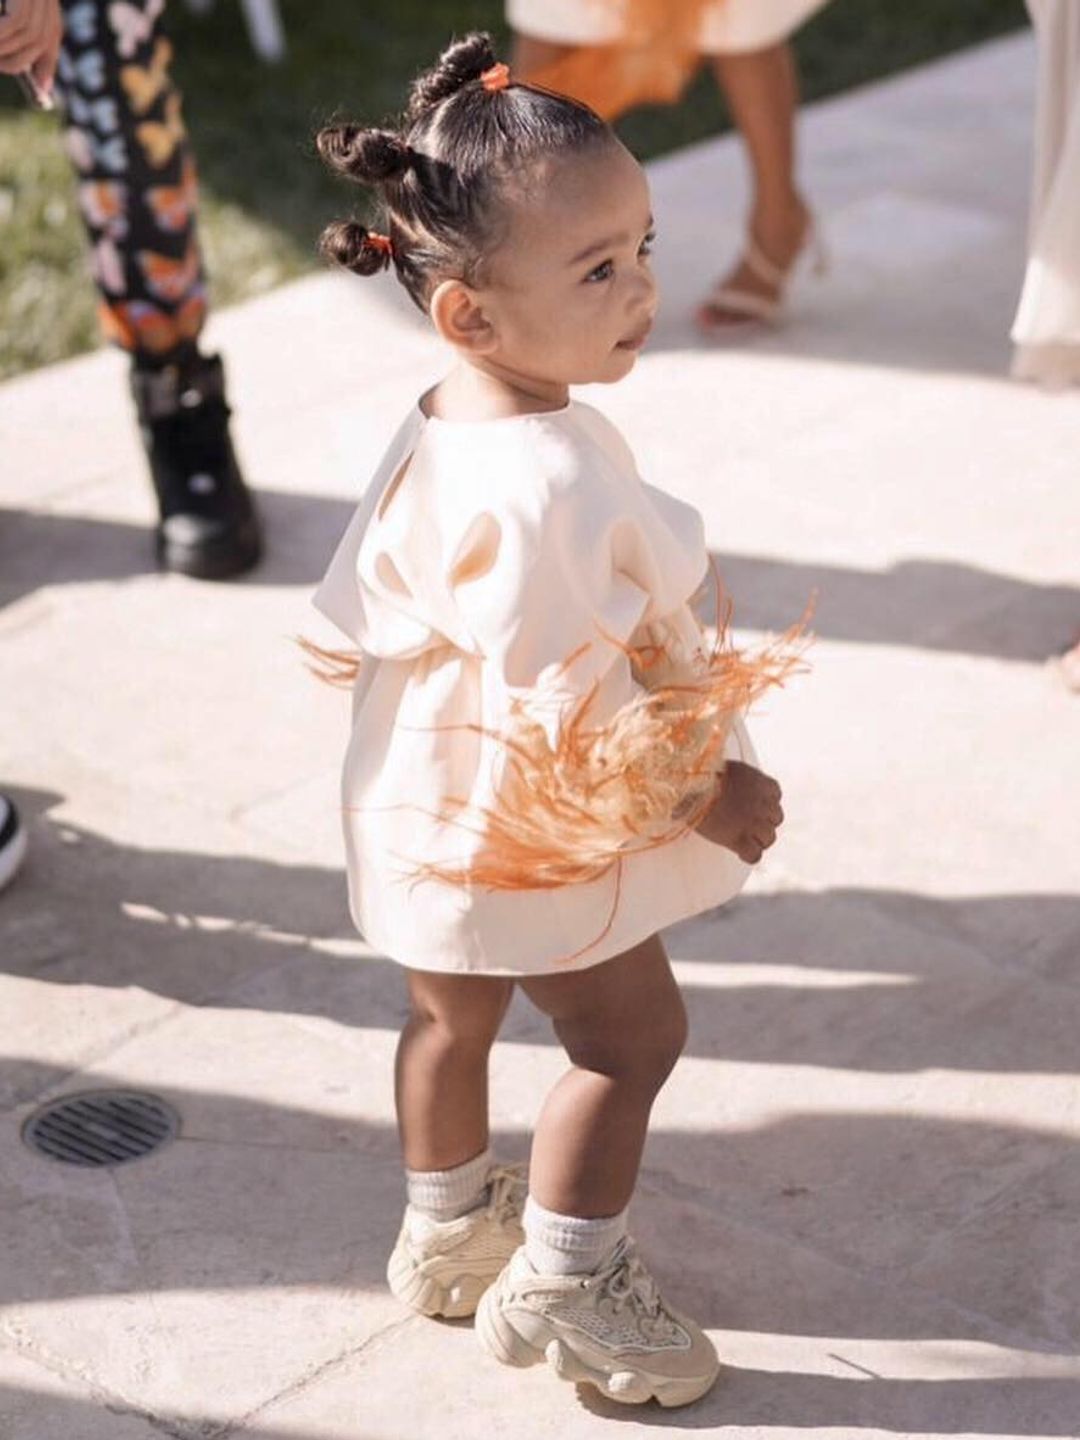 Chicago West walking away from the camera smiling